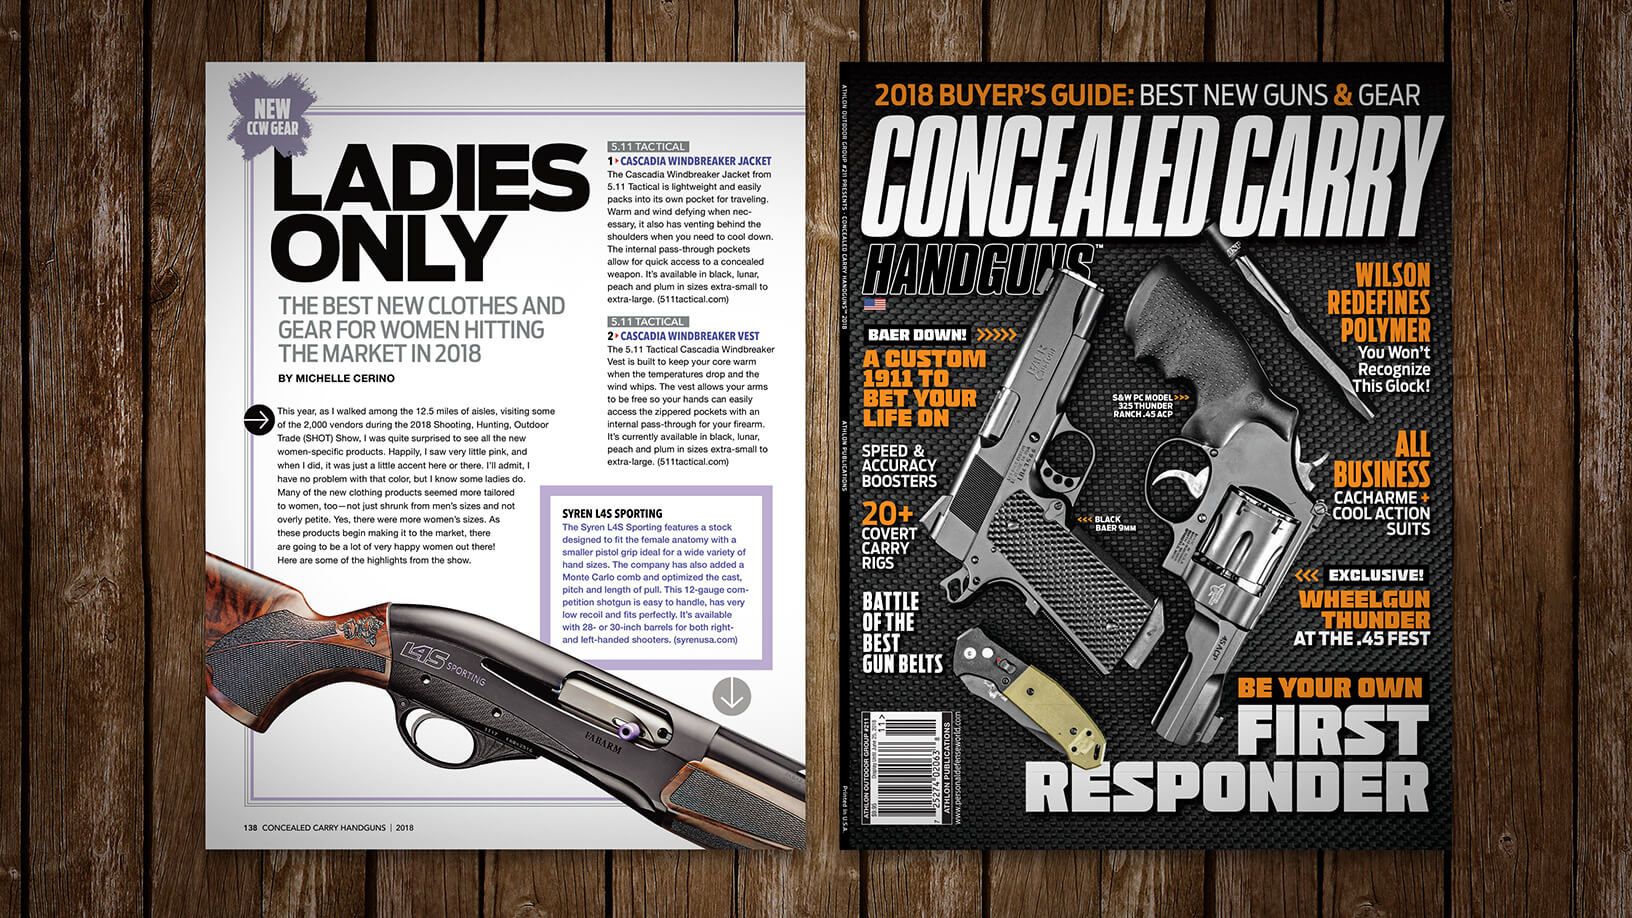 [Concealed Carry Magazine: Issue #211 2018] Ladies Only: Syren L4S Sporting